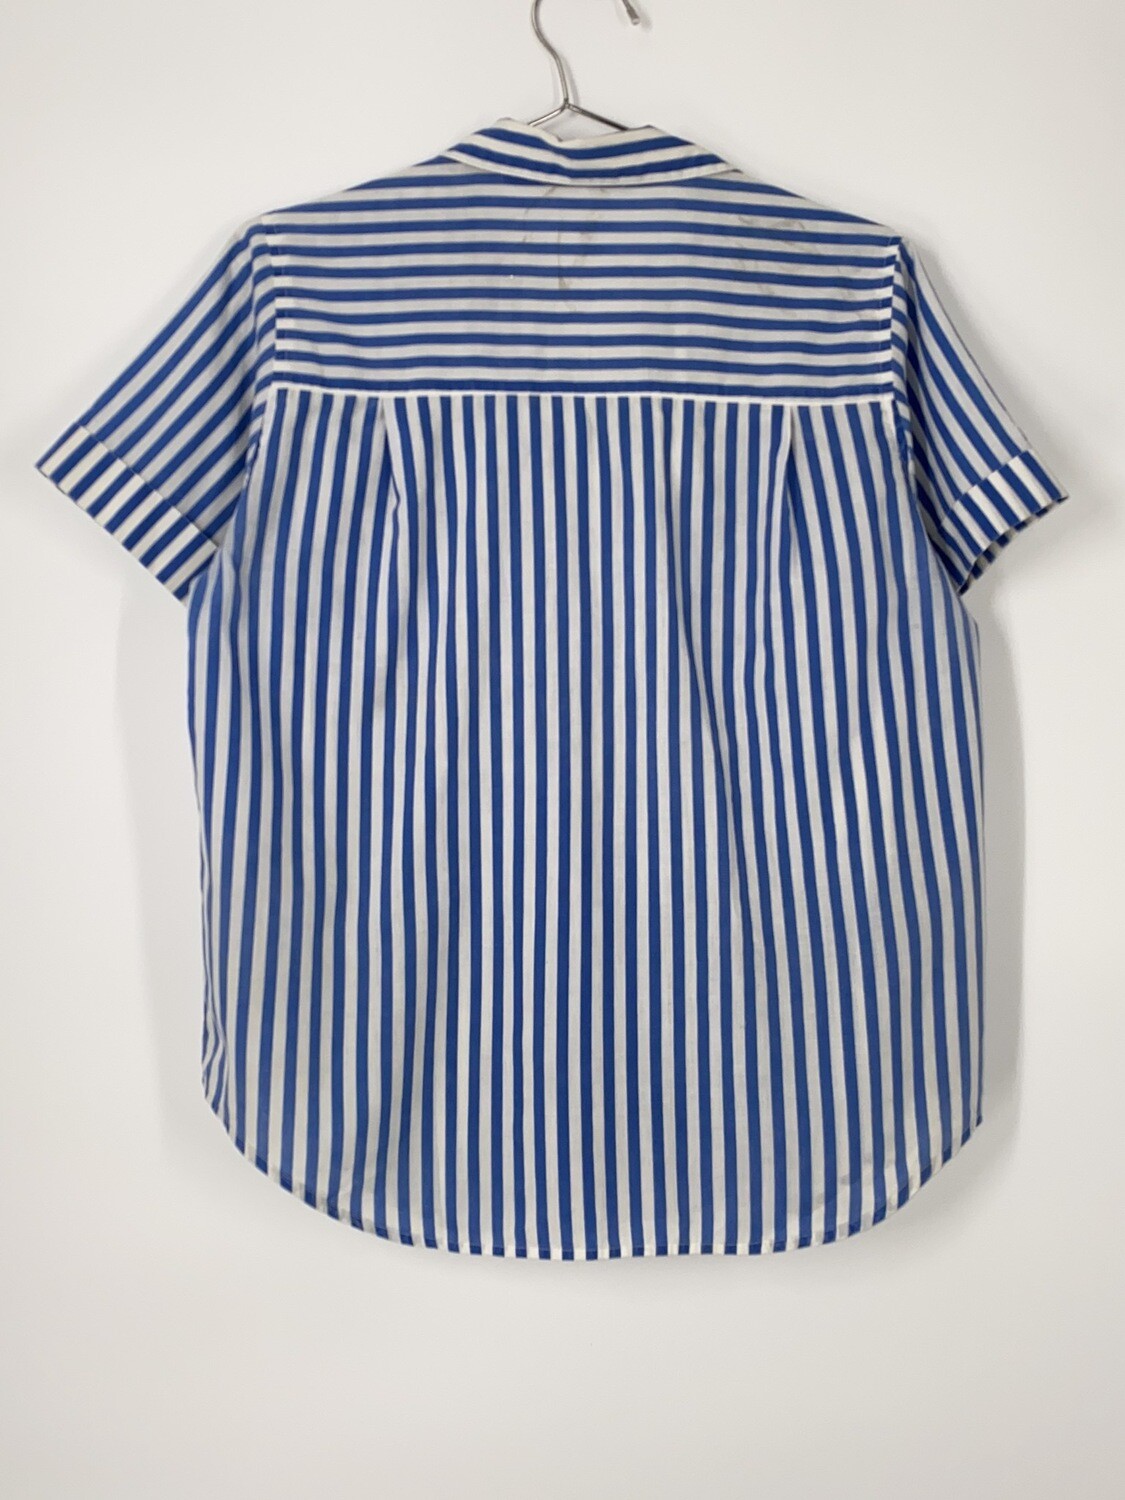 Blue And White Striped Button Up Top Size S